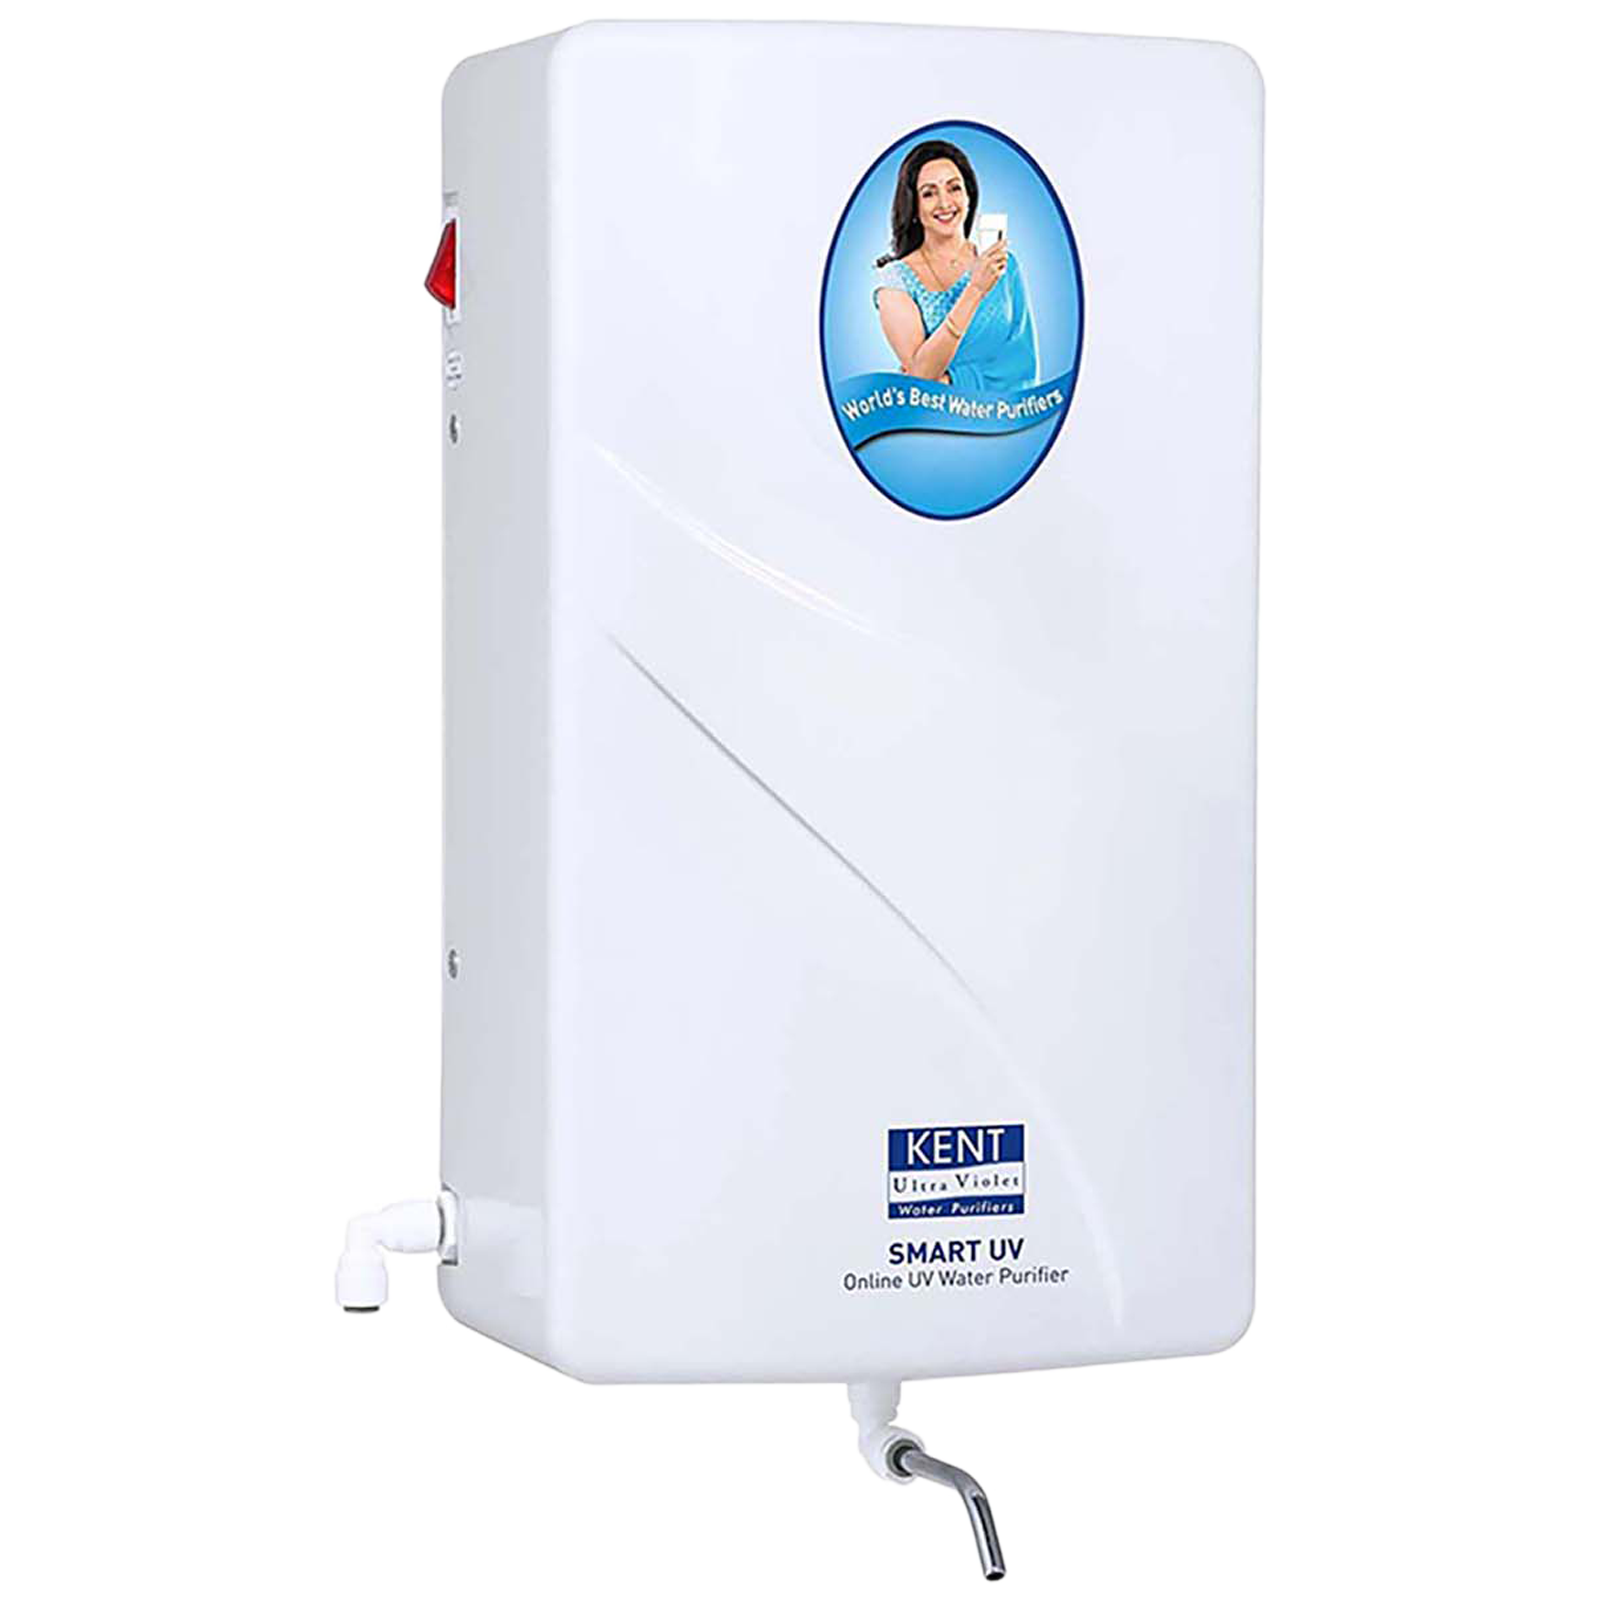 Kent Smart UV Electrical Water Purifier (Compact Design, 11138, White)